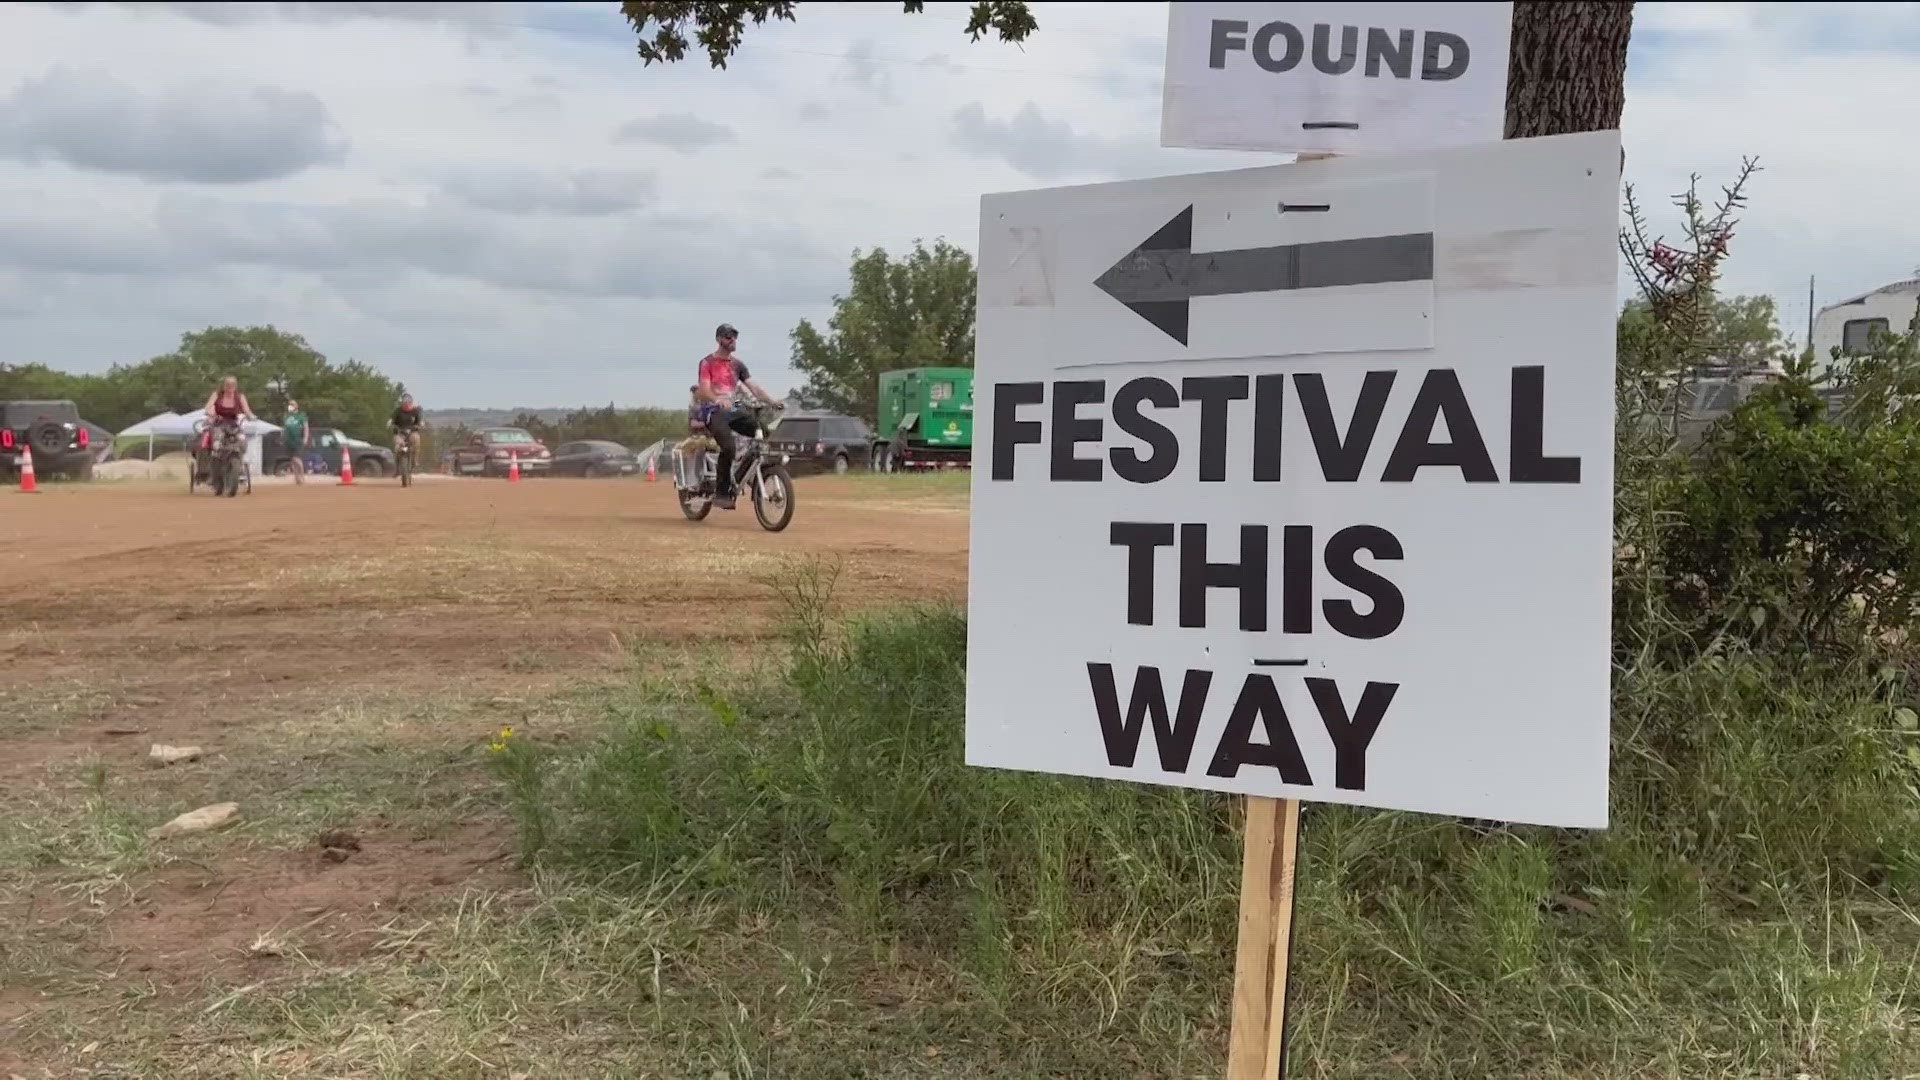 A number of users on social media claimed that some music artists had pulled out of the festival, campsites lacked space and that there was no on-site will call.